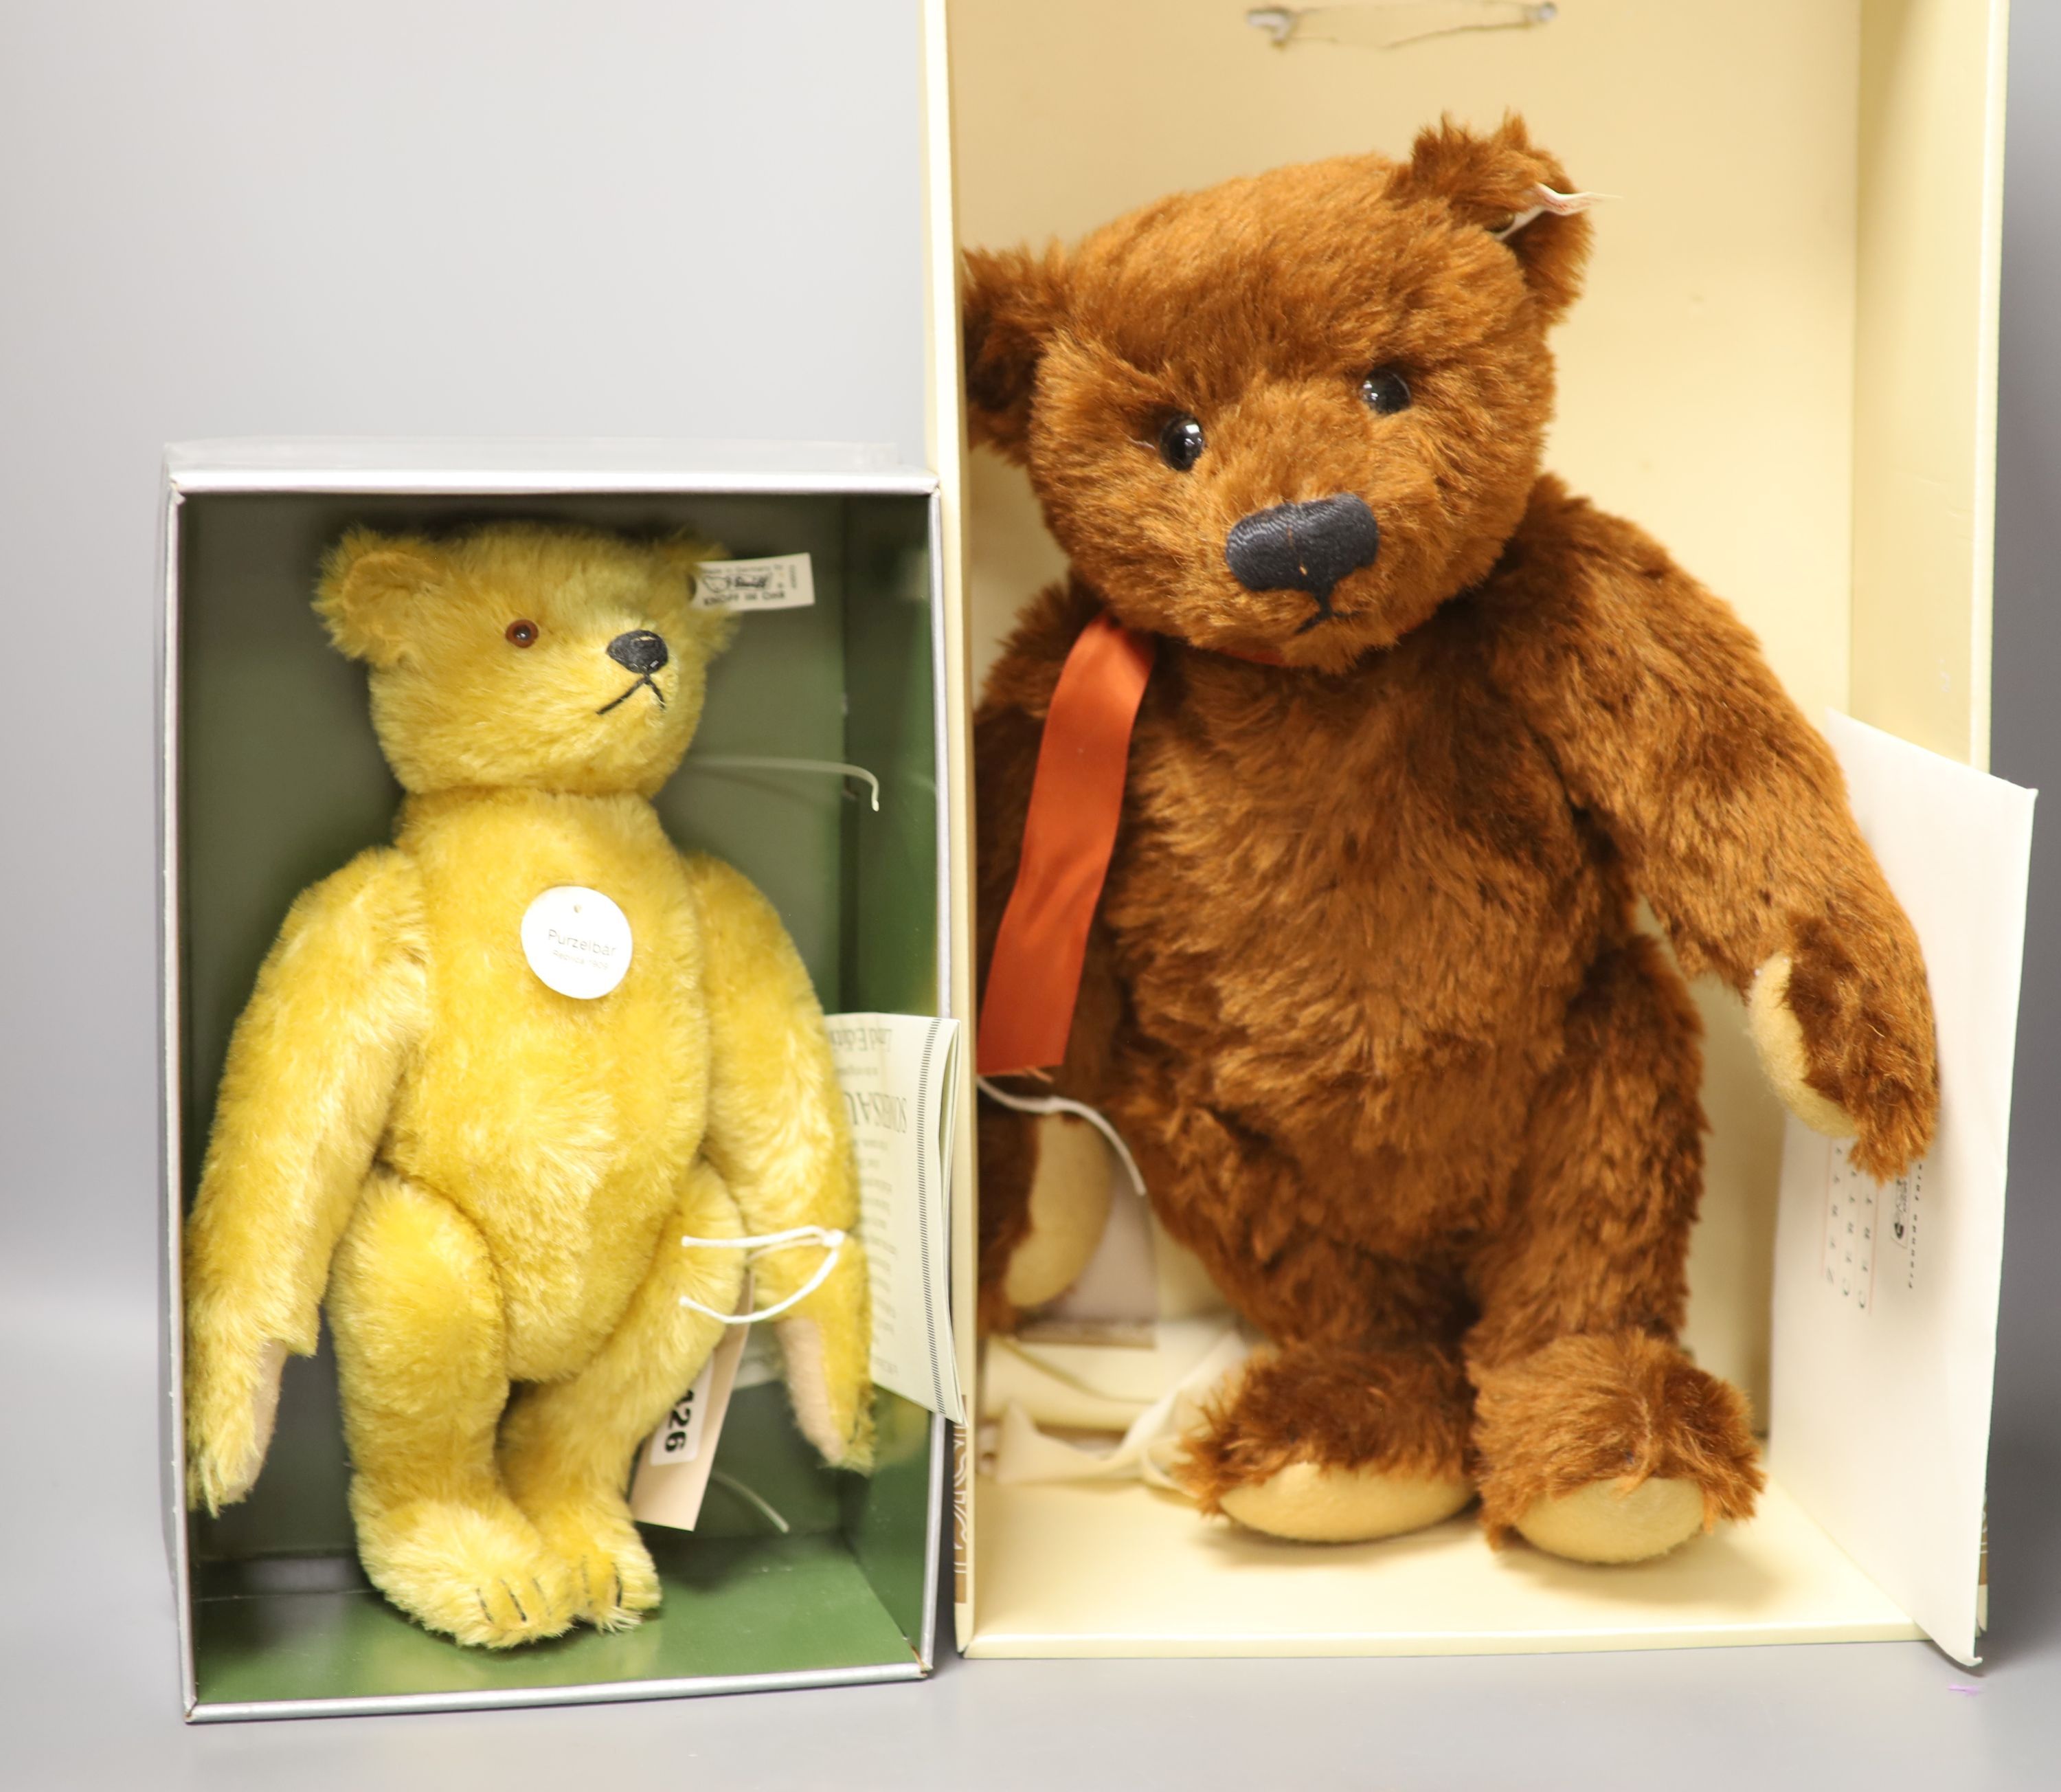 Louis Bean limited edition USA Steiff, box and certificate and Steiff Somersault bear, box and certificate